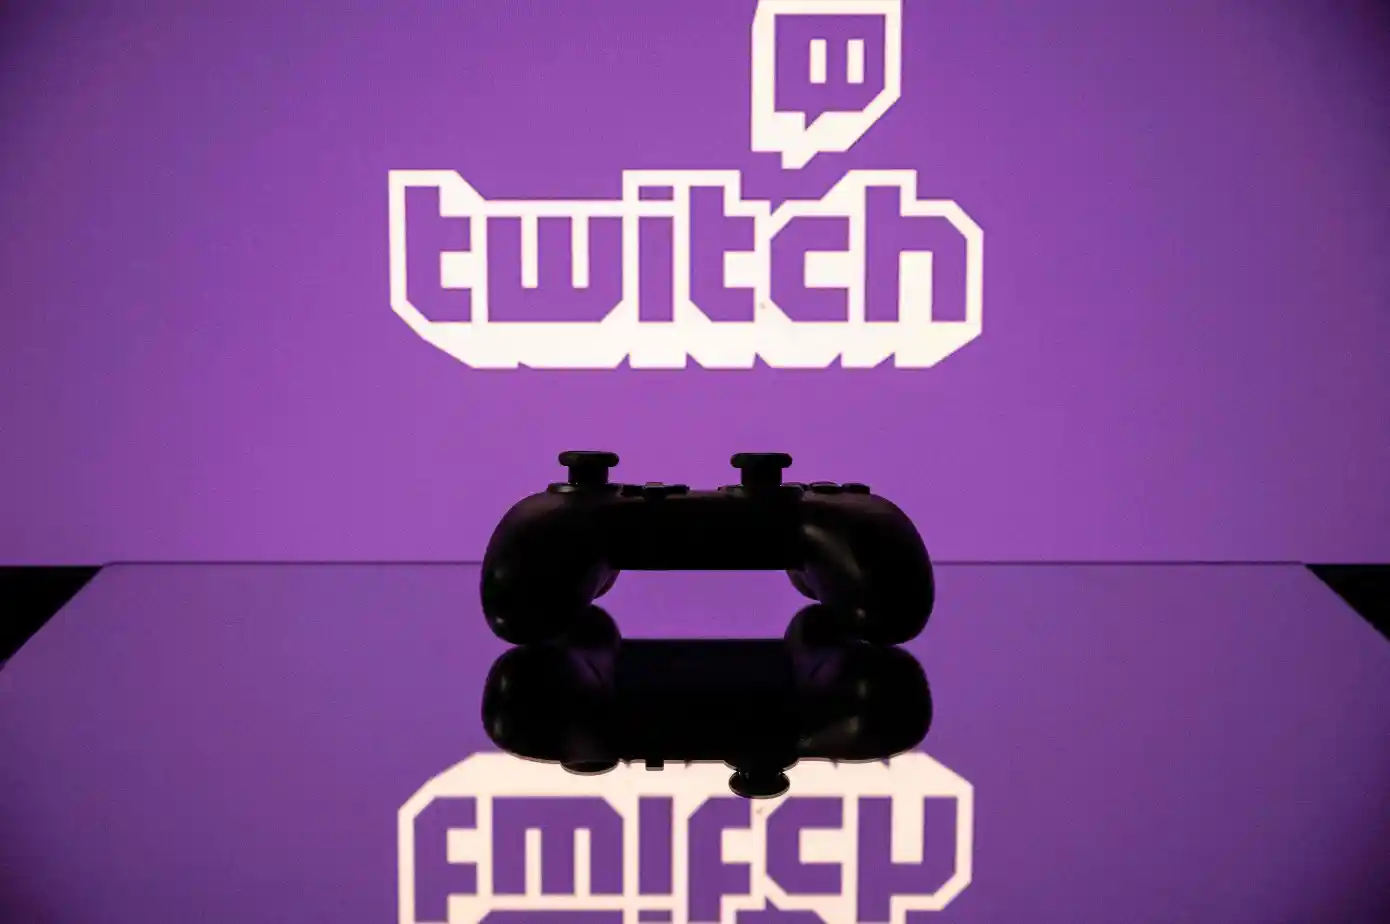 What’s next for Twitch? A big app redesign and more social sharing